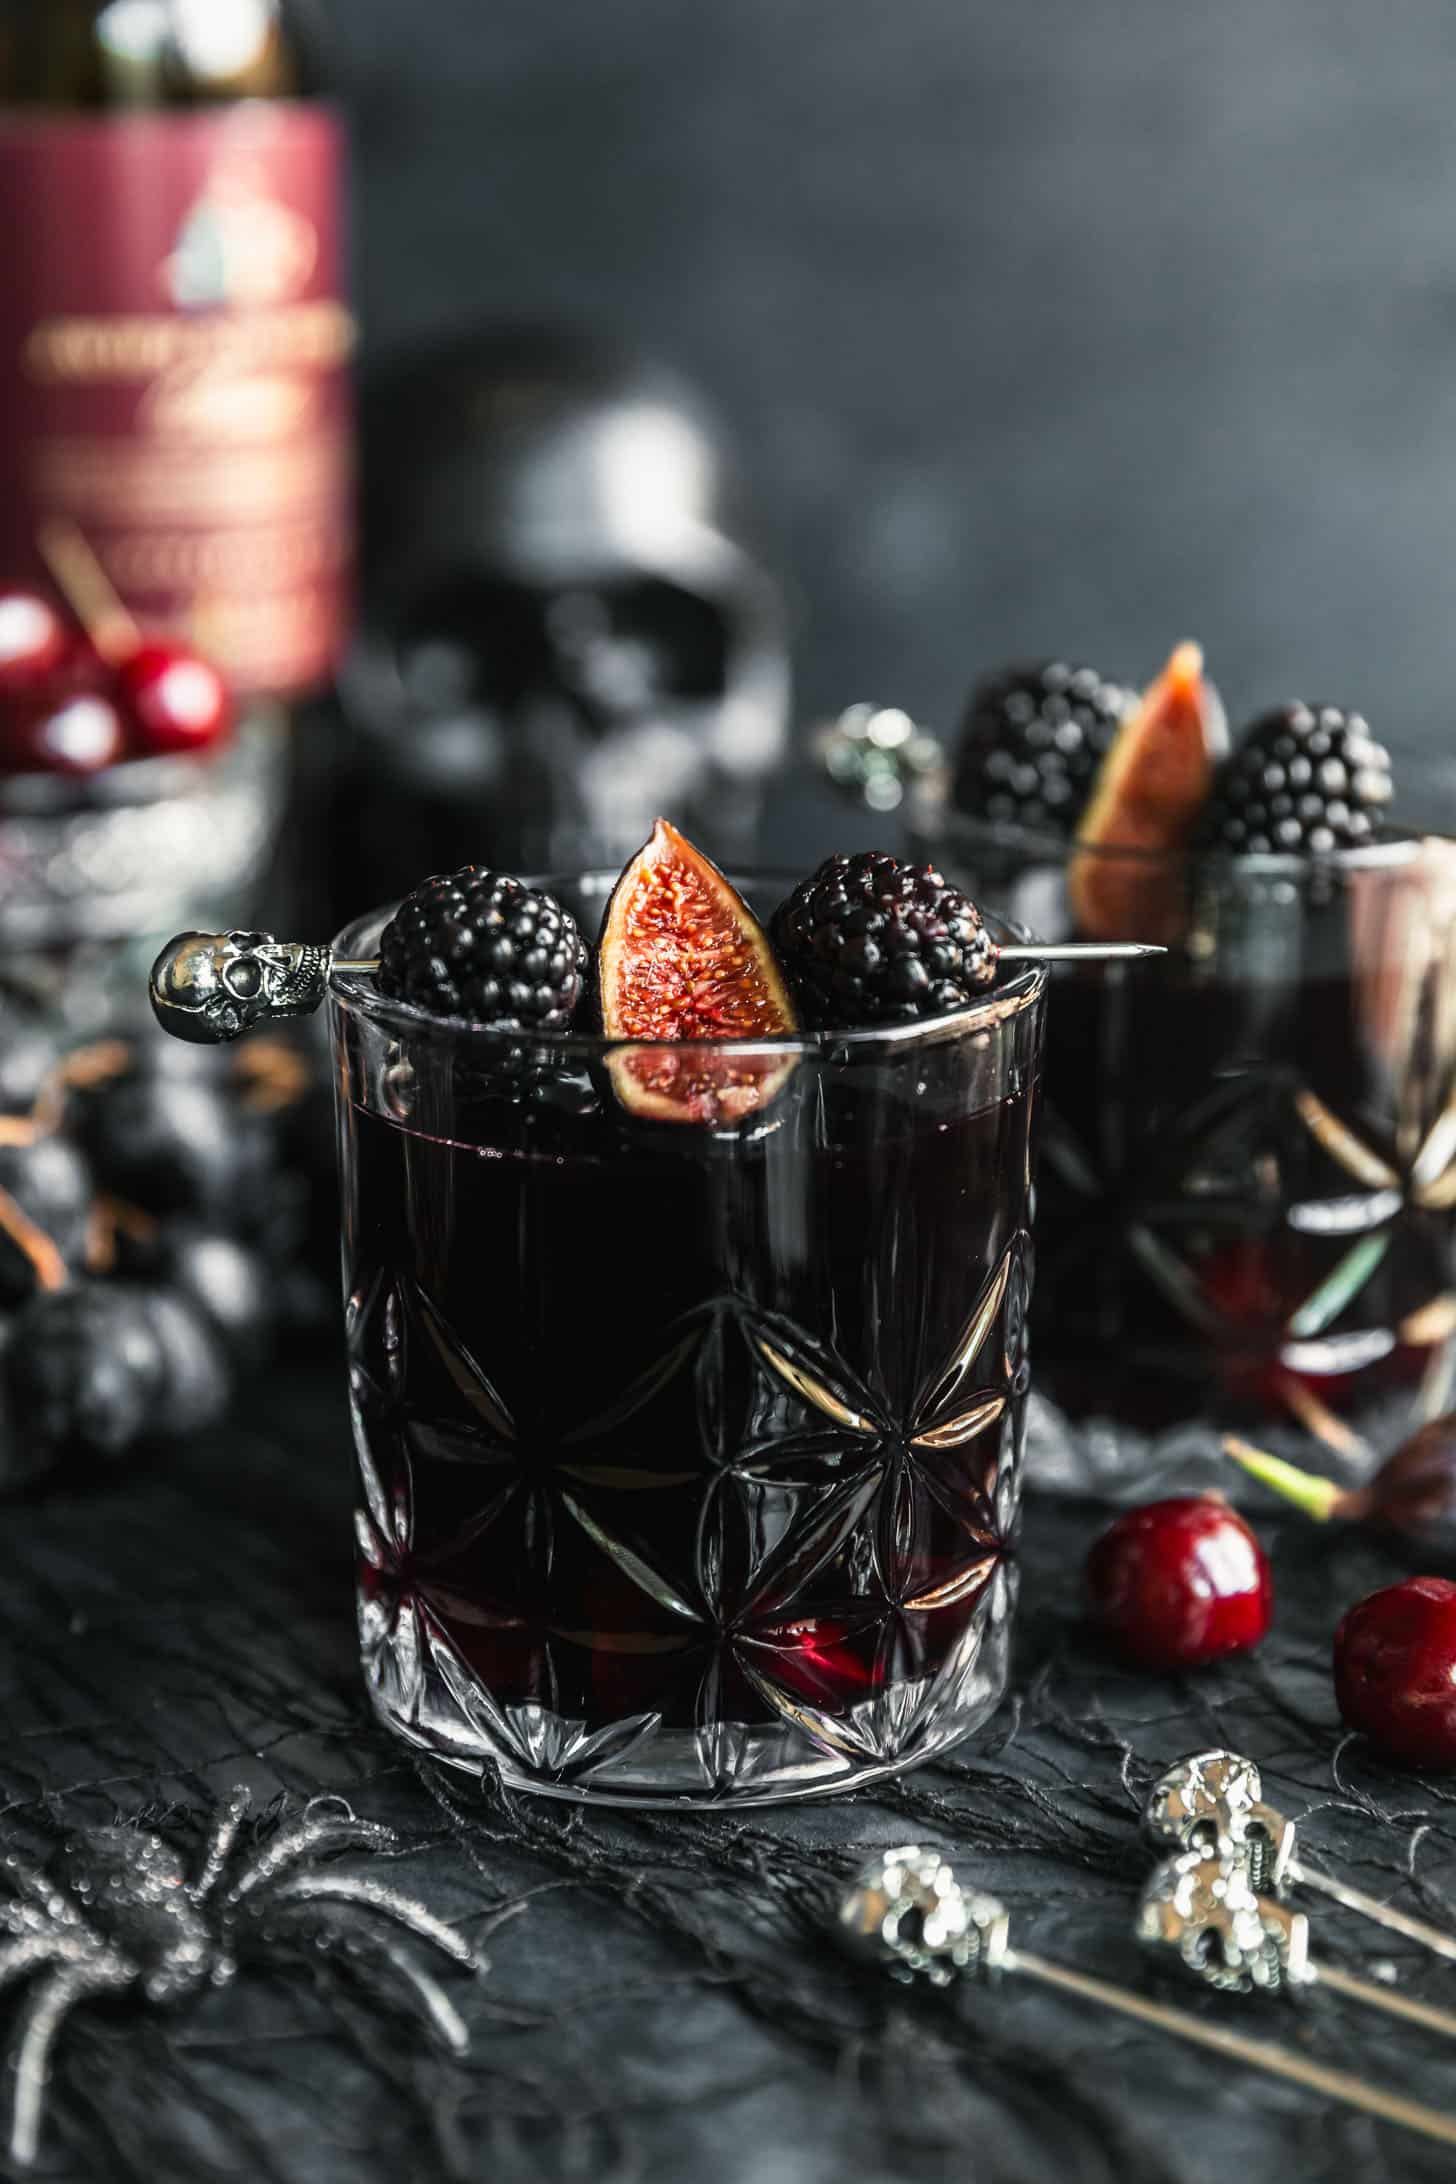 Two glasses of black Halloween sangria garnished with skull picks, blackberries, and figs on a black background next to cherries, grapes. a black skull, and a crystal glass of cherries.